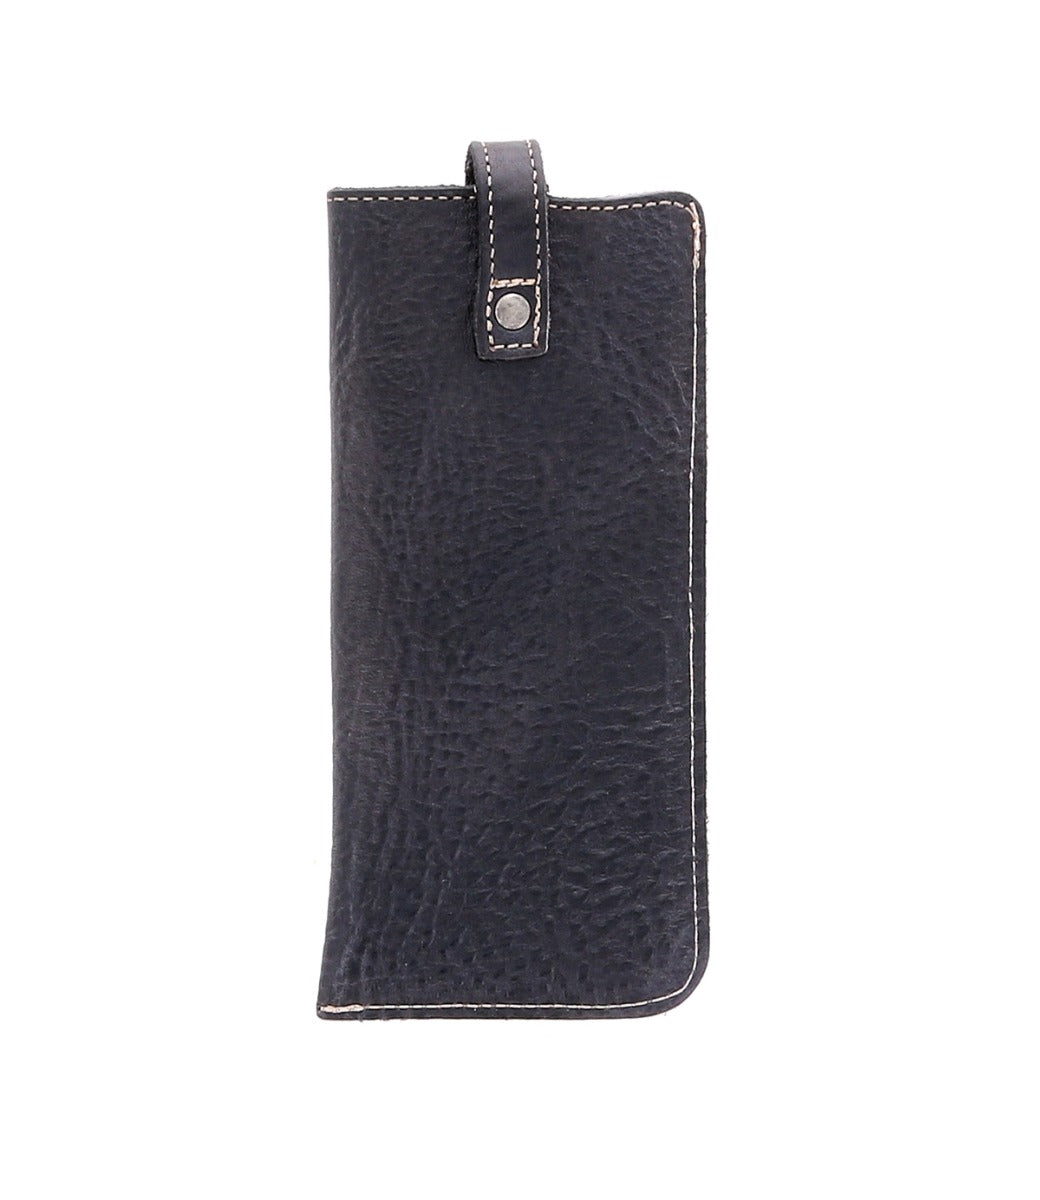 A black leather Behold phone case with a zipper by Bed Stu.